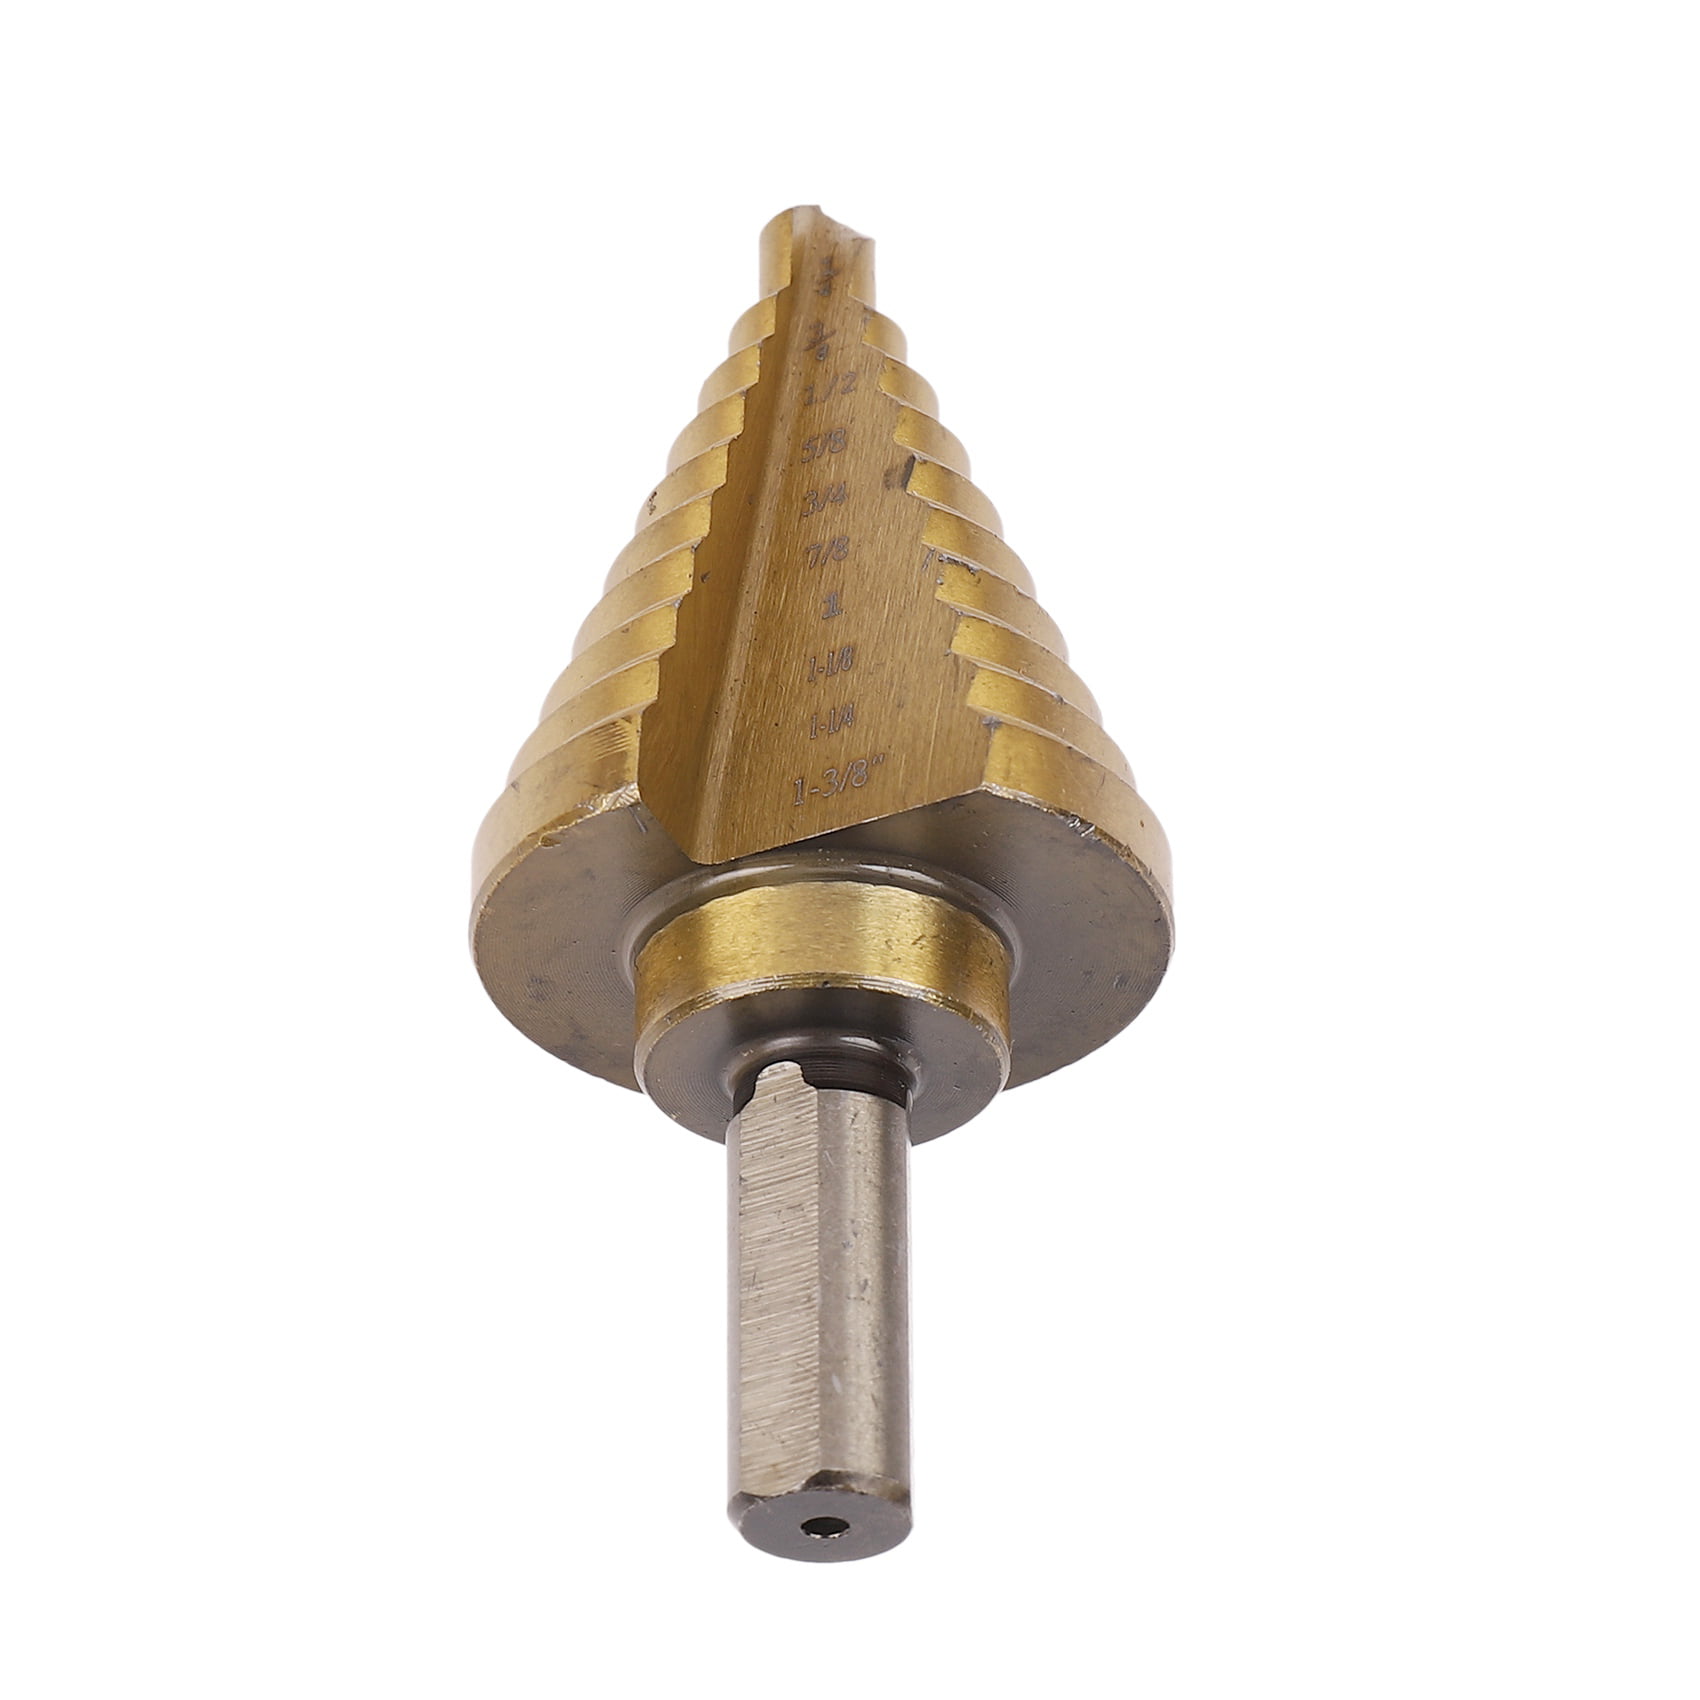 10 Sizes Step Drill Bit,1/4 to 1-3/8 Inches High Speed Steel Drill Cone  Bits,Straight Grooved Double Fluted,M2 High Speed Steel Drill bits for Hole